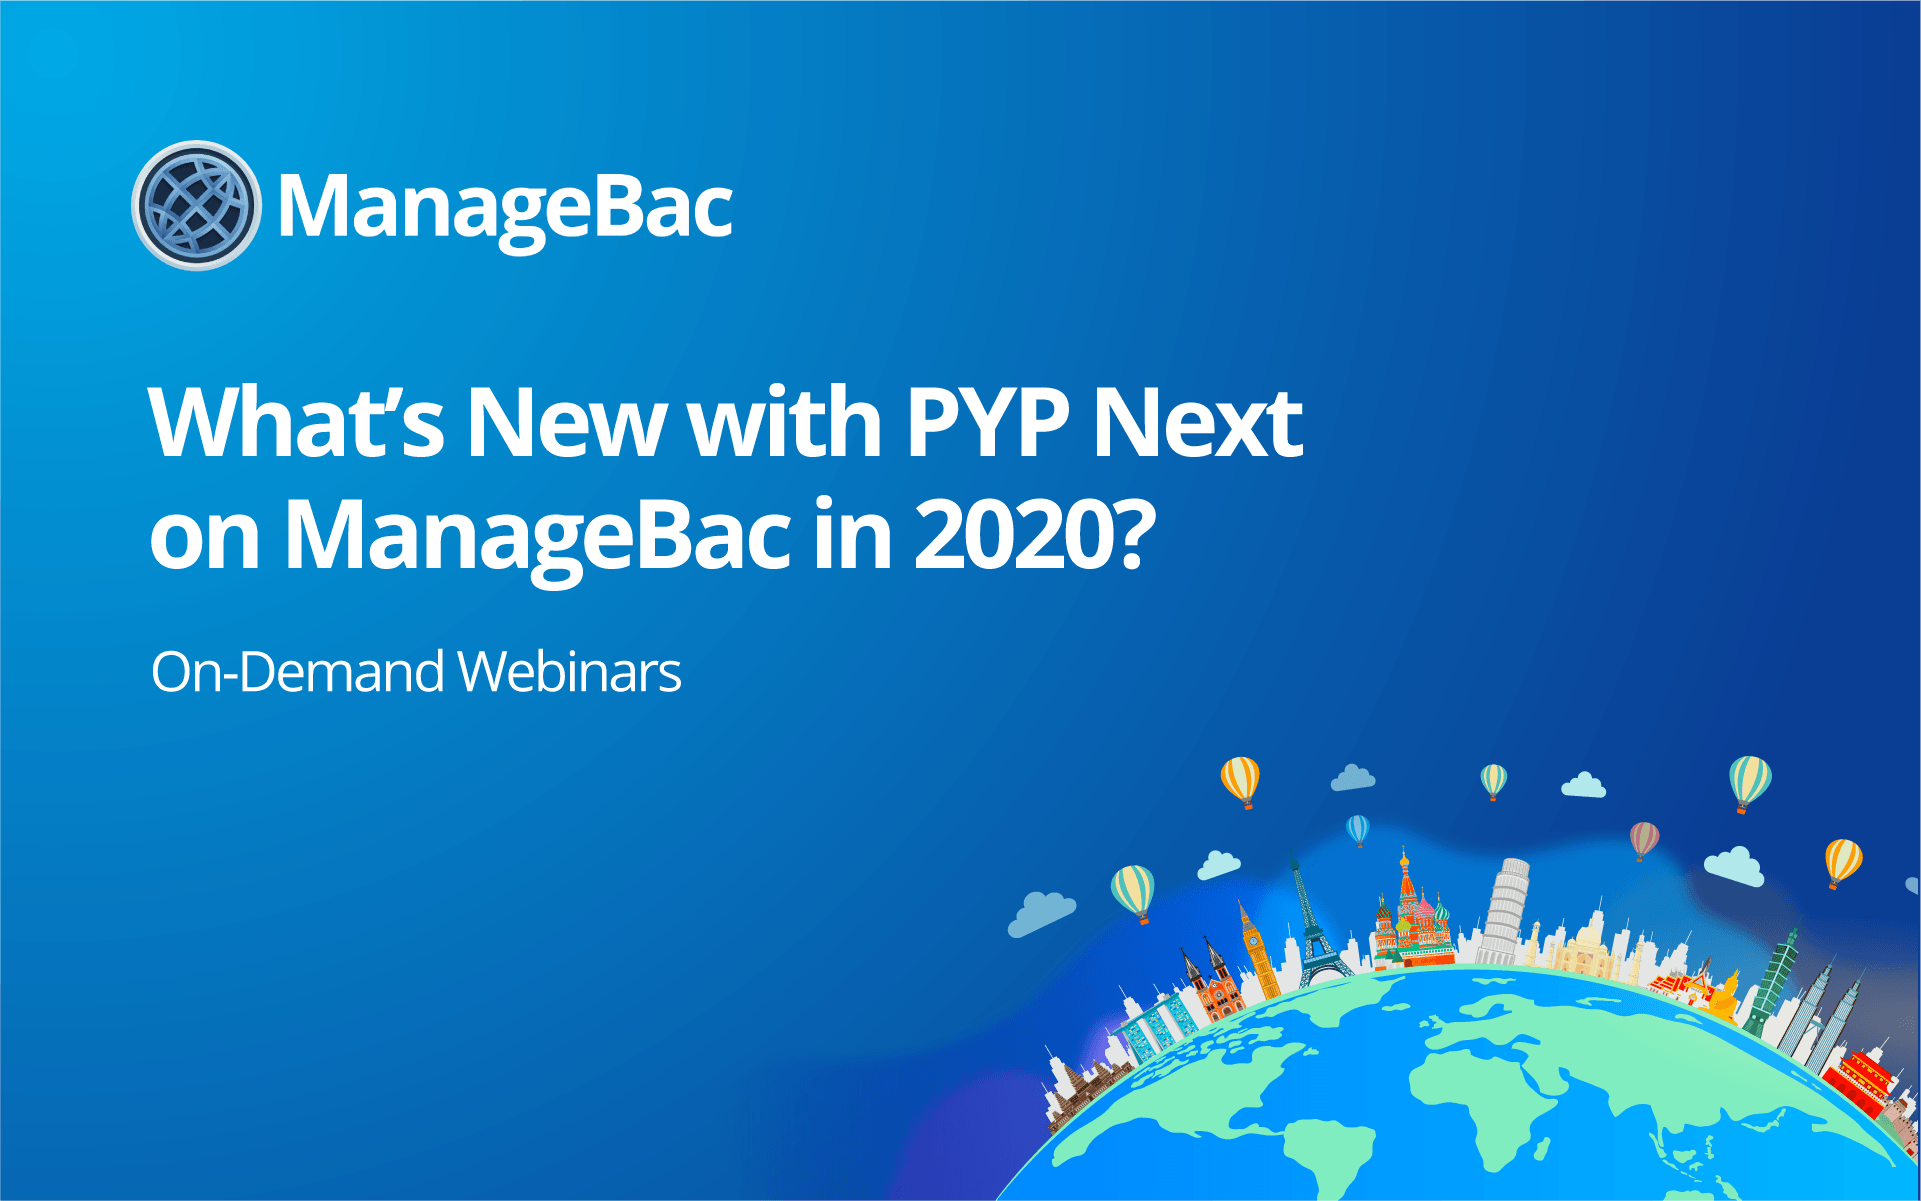 What’s new with PYP Next on ManageBac in 2020?